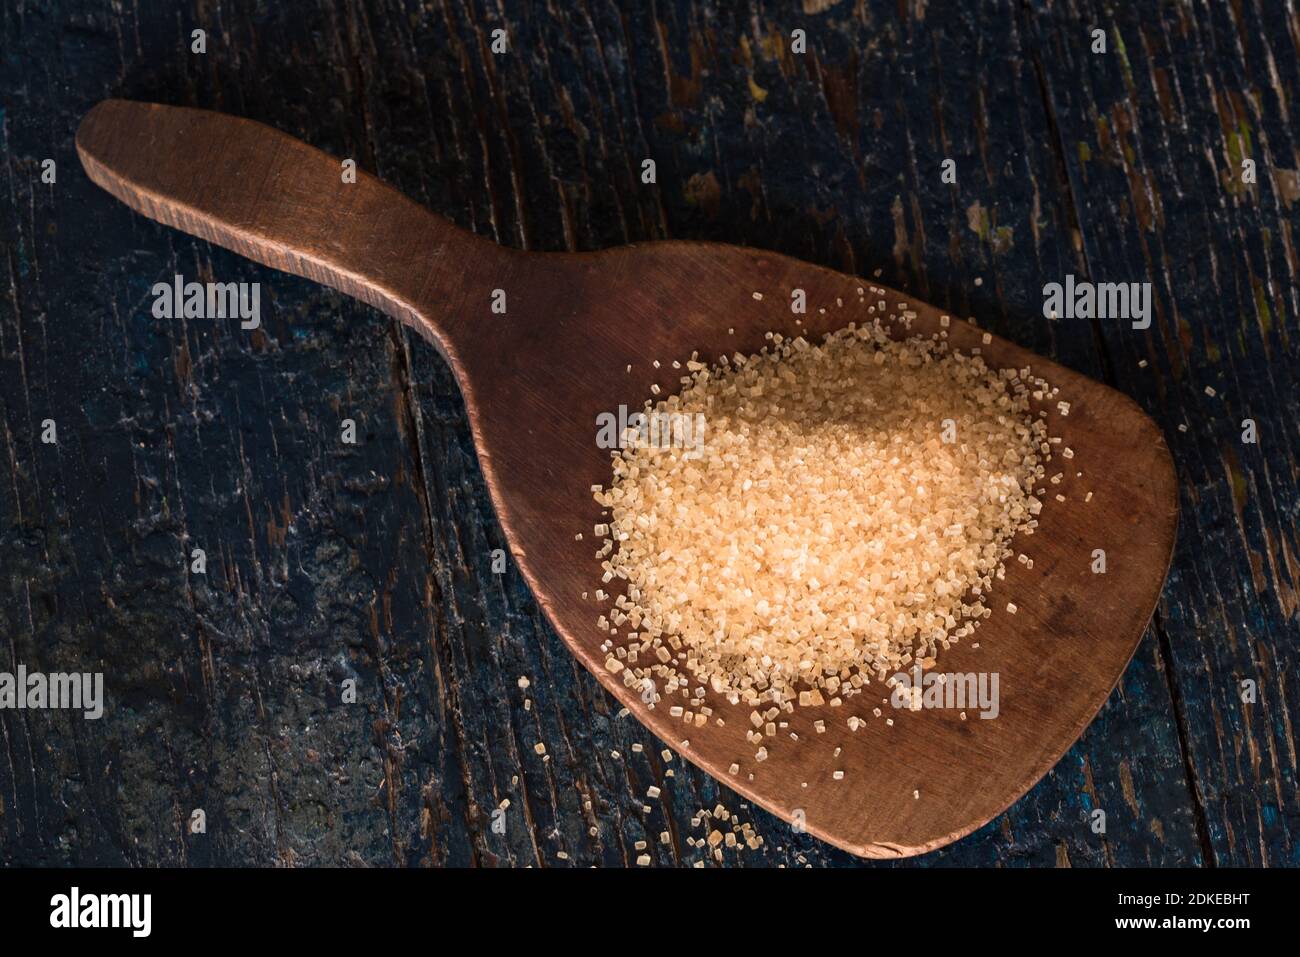 Close-up Of Sugar In Wooden Spoon On Table Stock Photo